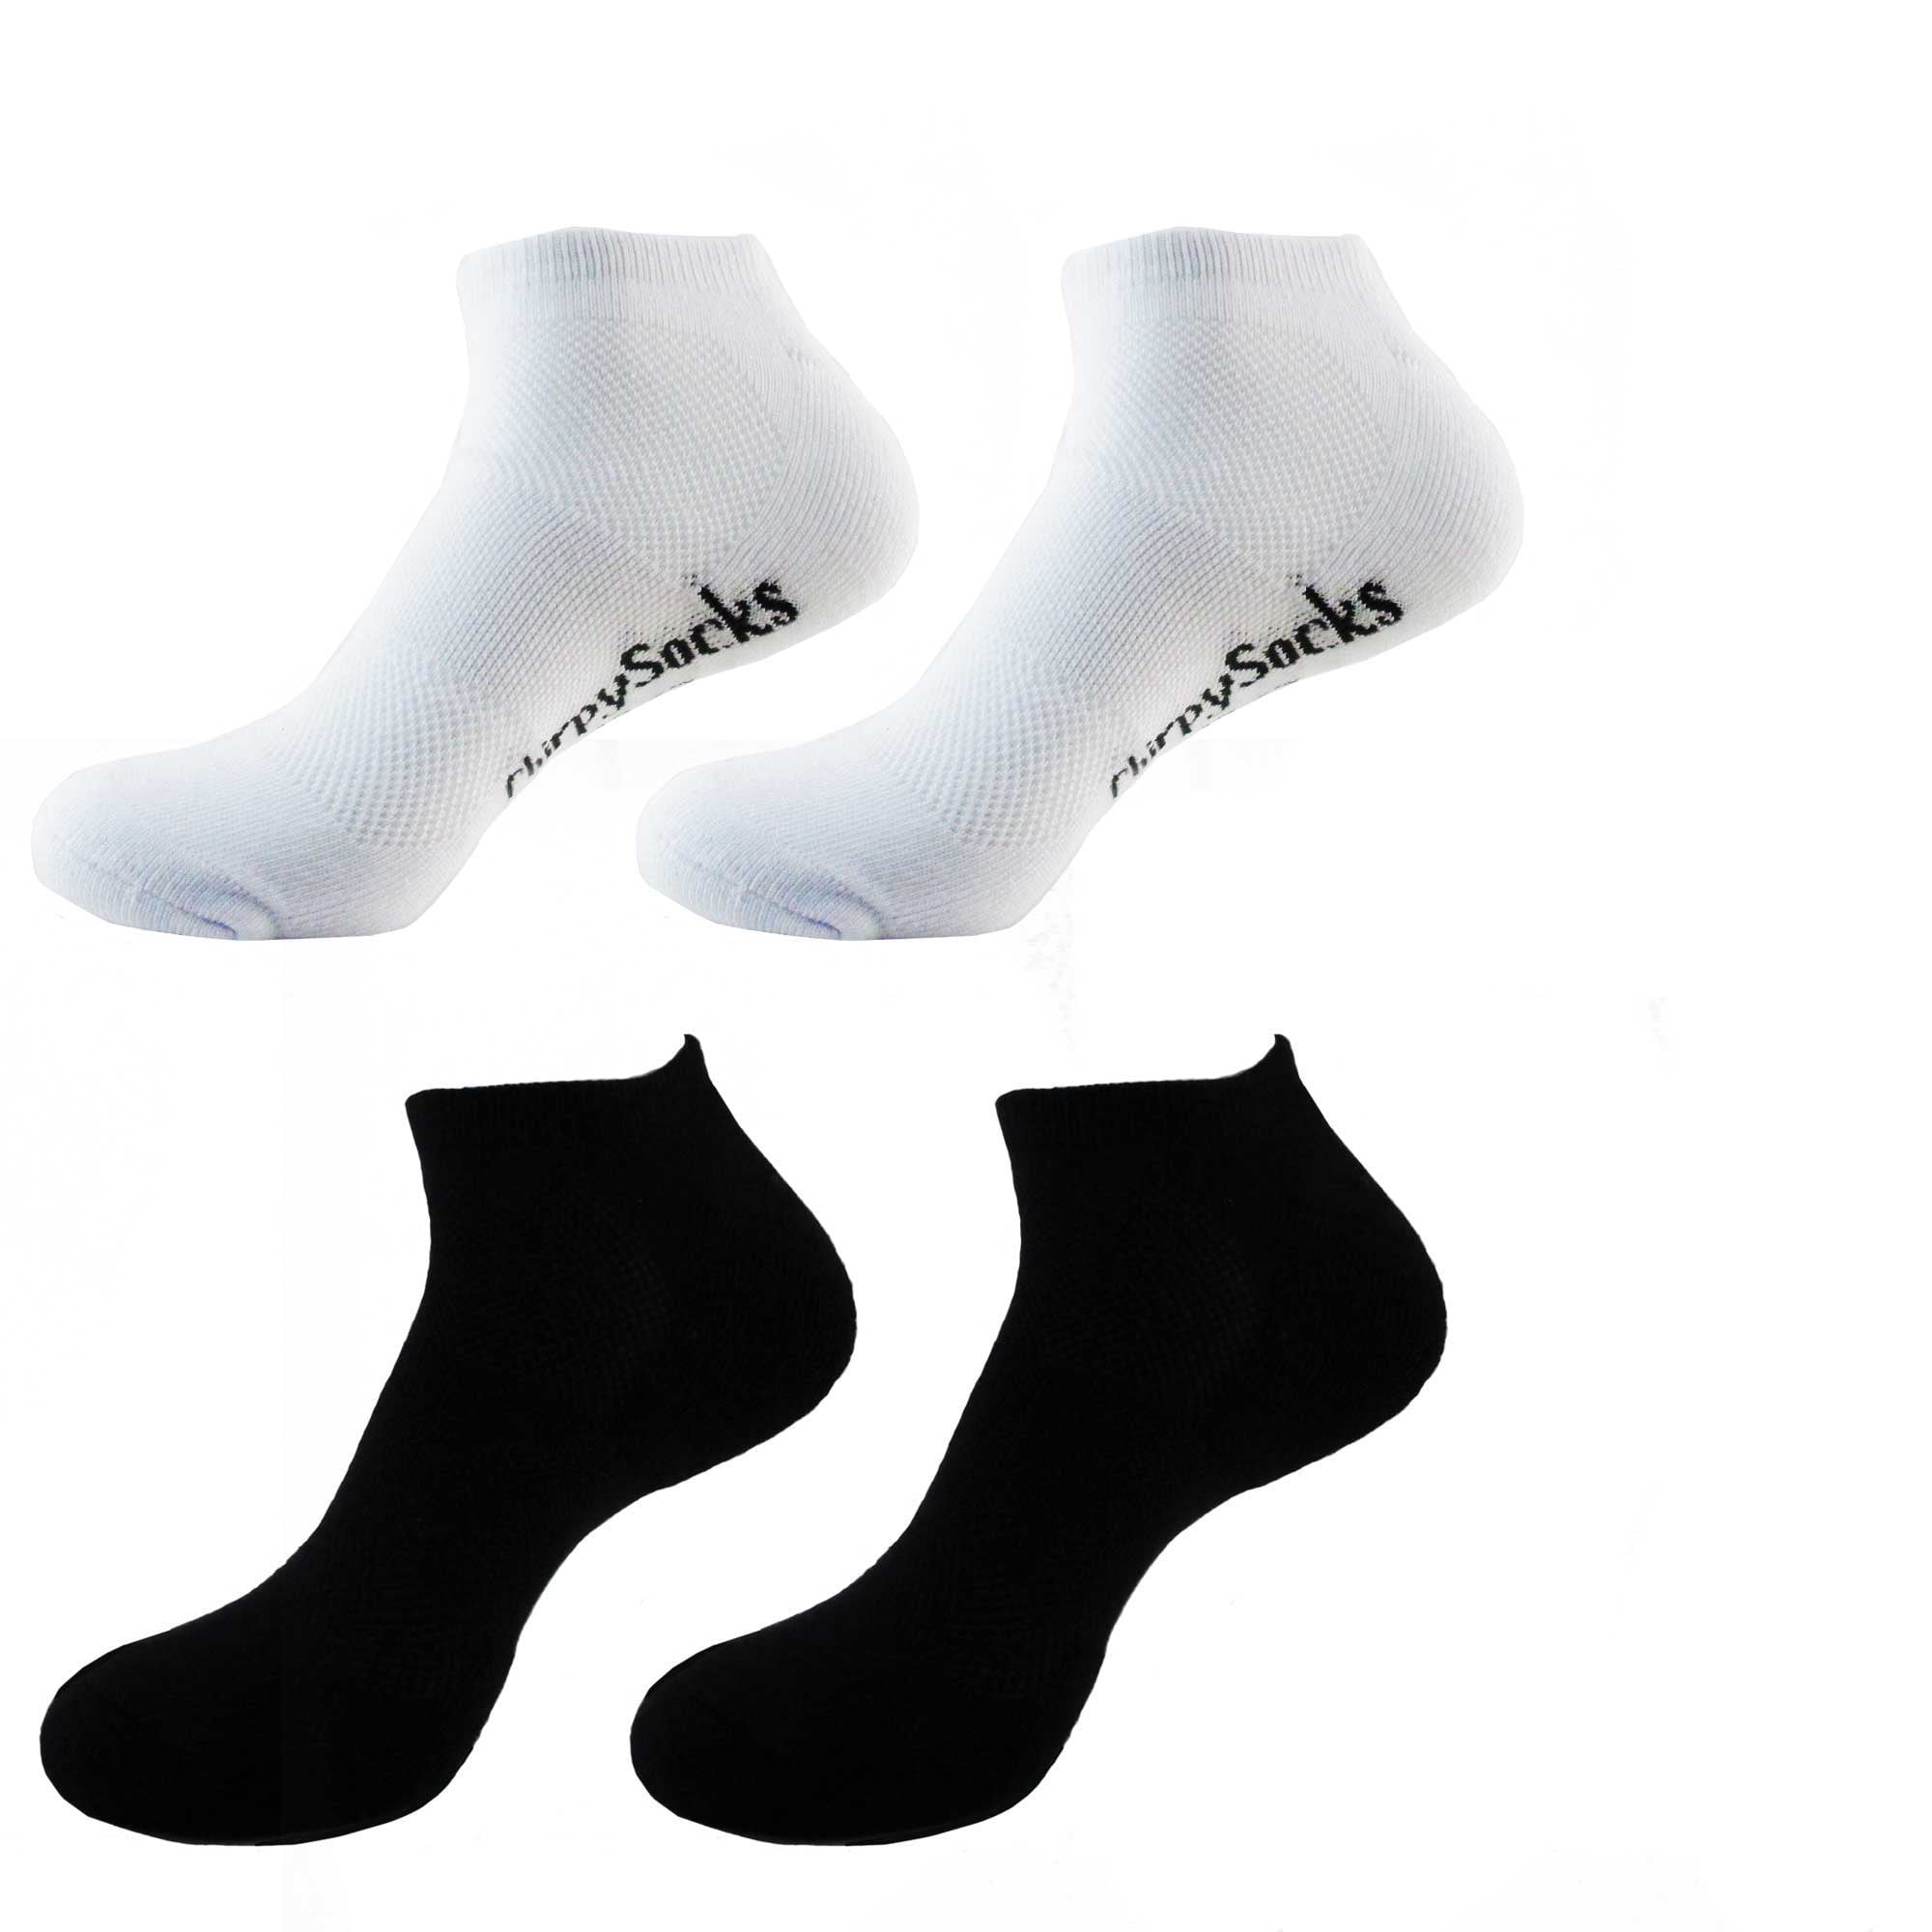 10 Pairs Pack Donnay Ankle Trainer Sports Socks For Men Women And Children Multipack 